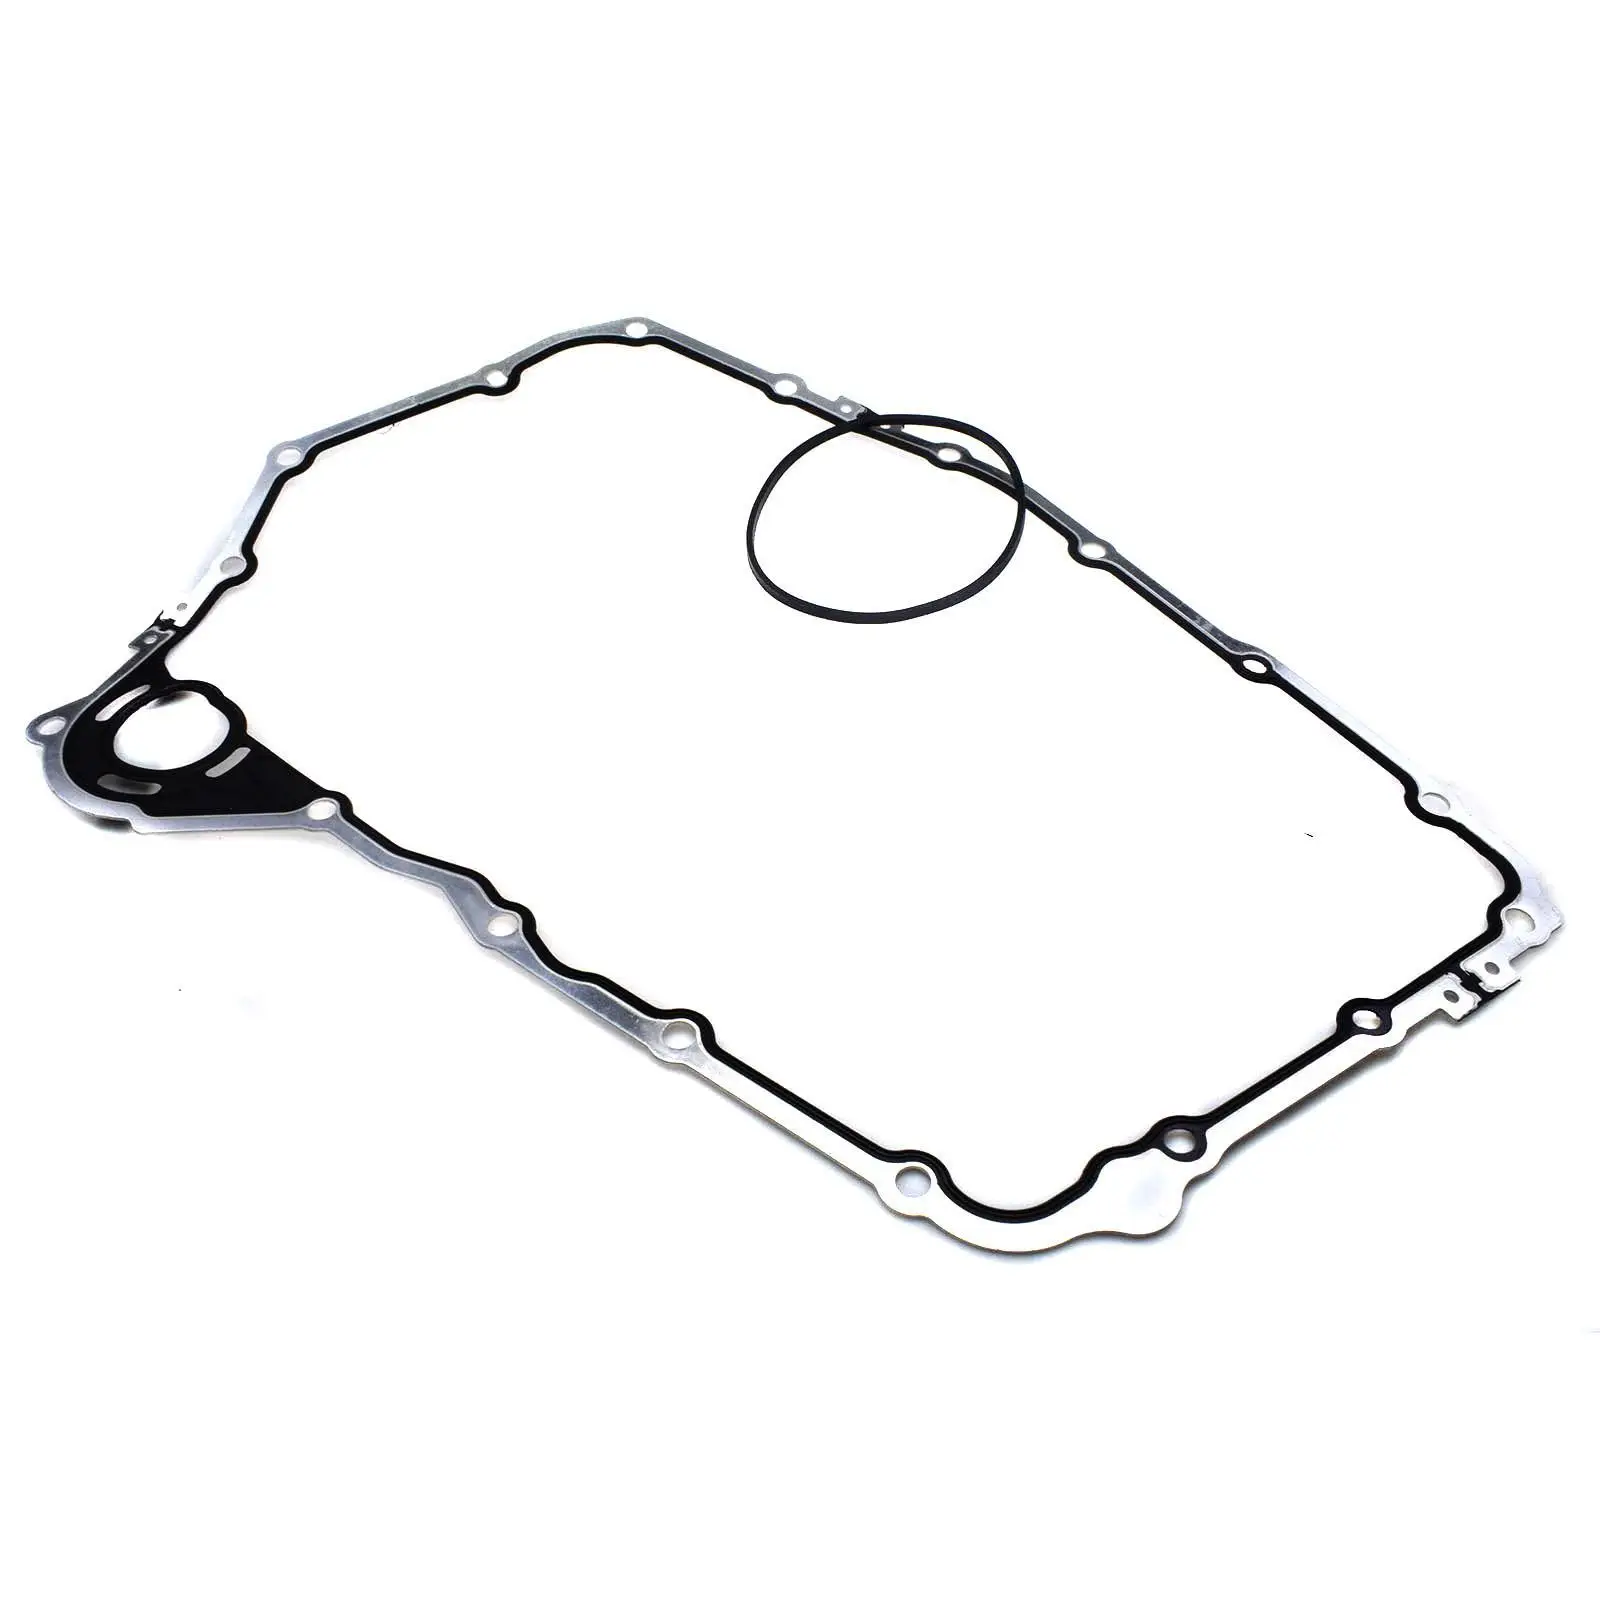 4T65E Automatic Transmission Case Gasket 24206959 Side Cover Seal Kit Fits for Buick 3.0 2.5/S80 Auto Rubber Parts